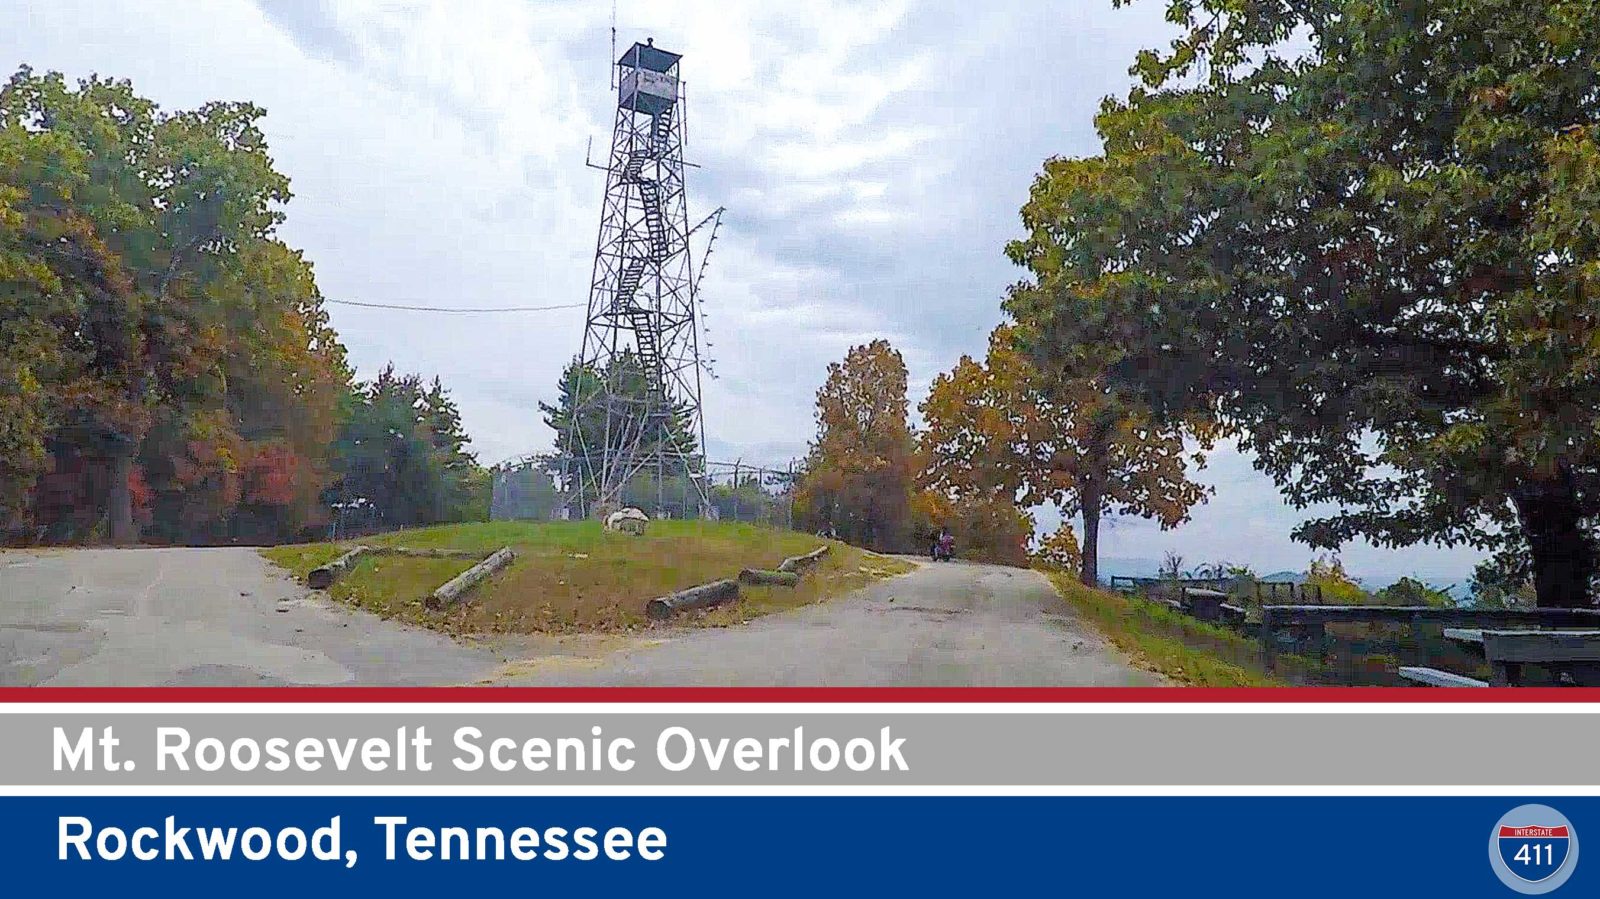 Drive America's Highways for 1.5 miles north along the Mt. Roosevelt Scenic Overlook Access Road in Rockwood, Tennessee